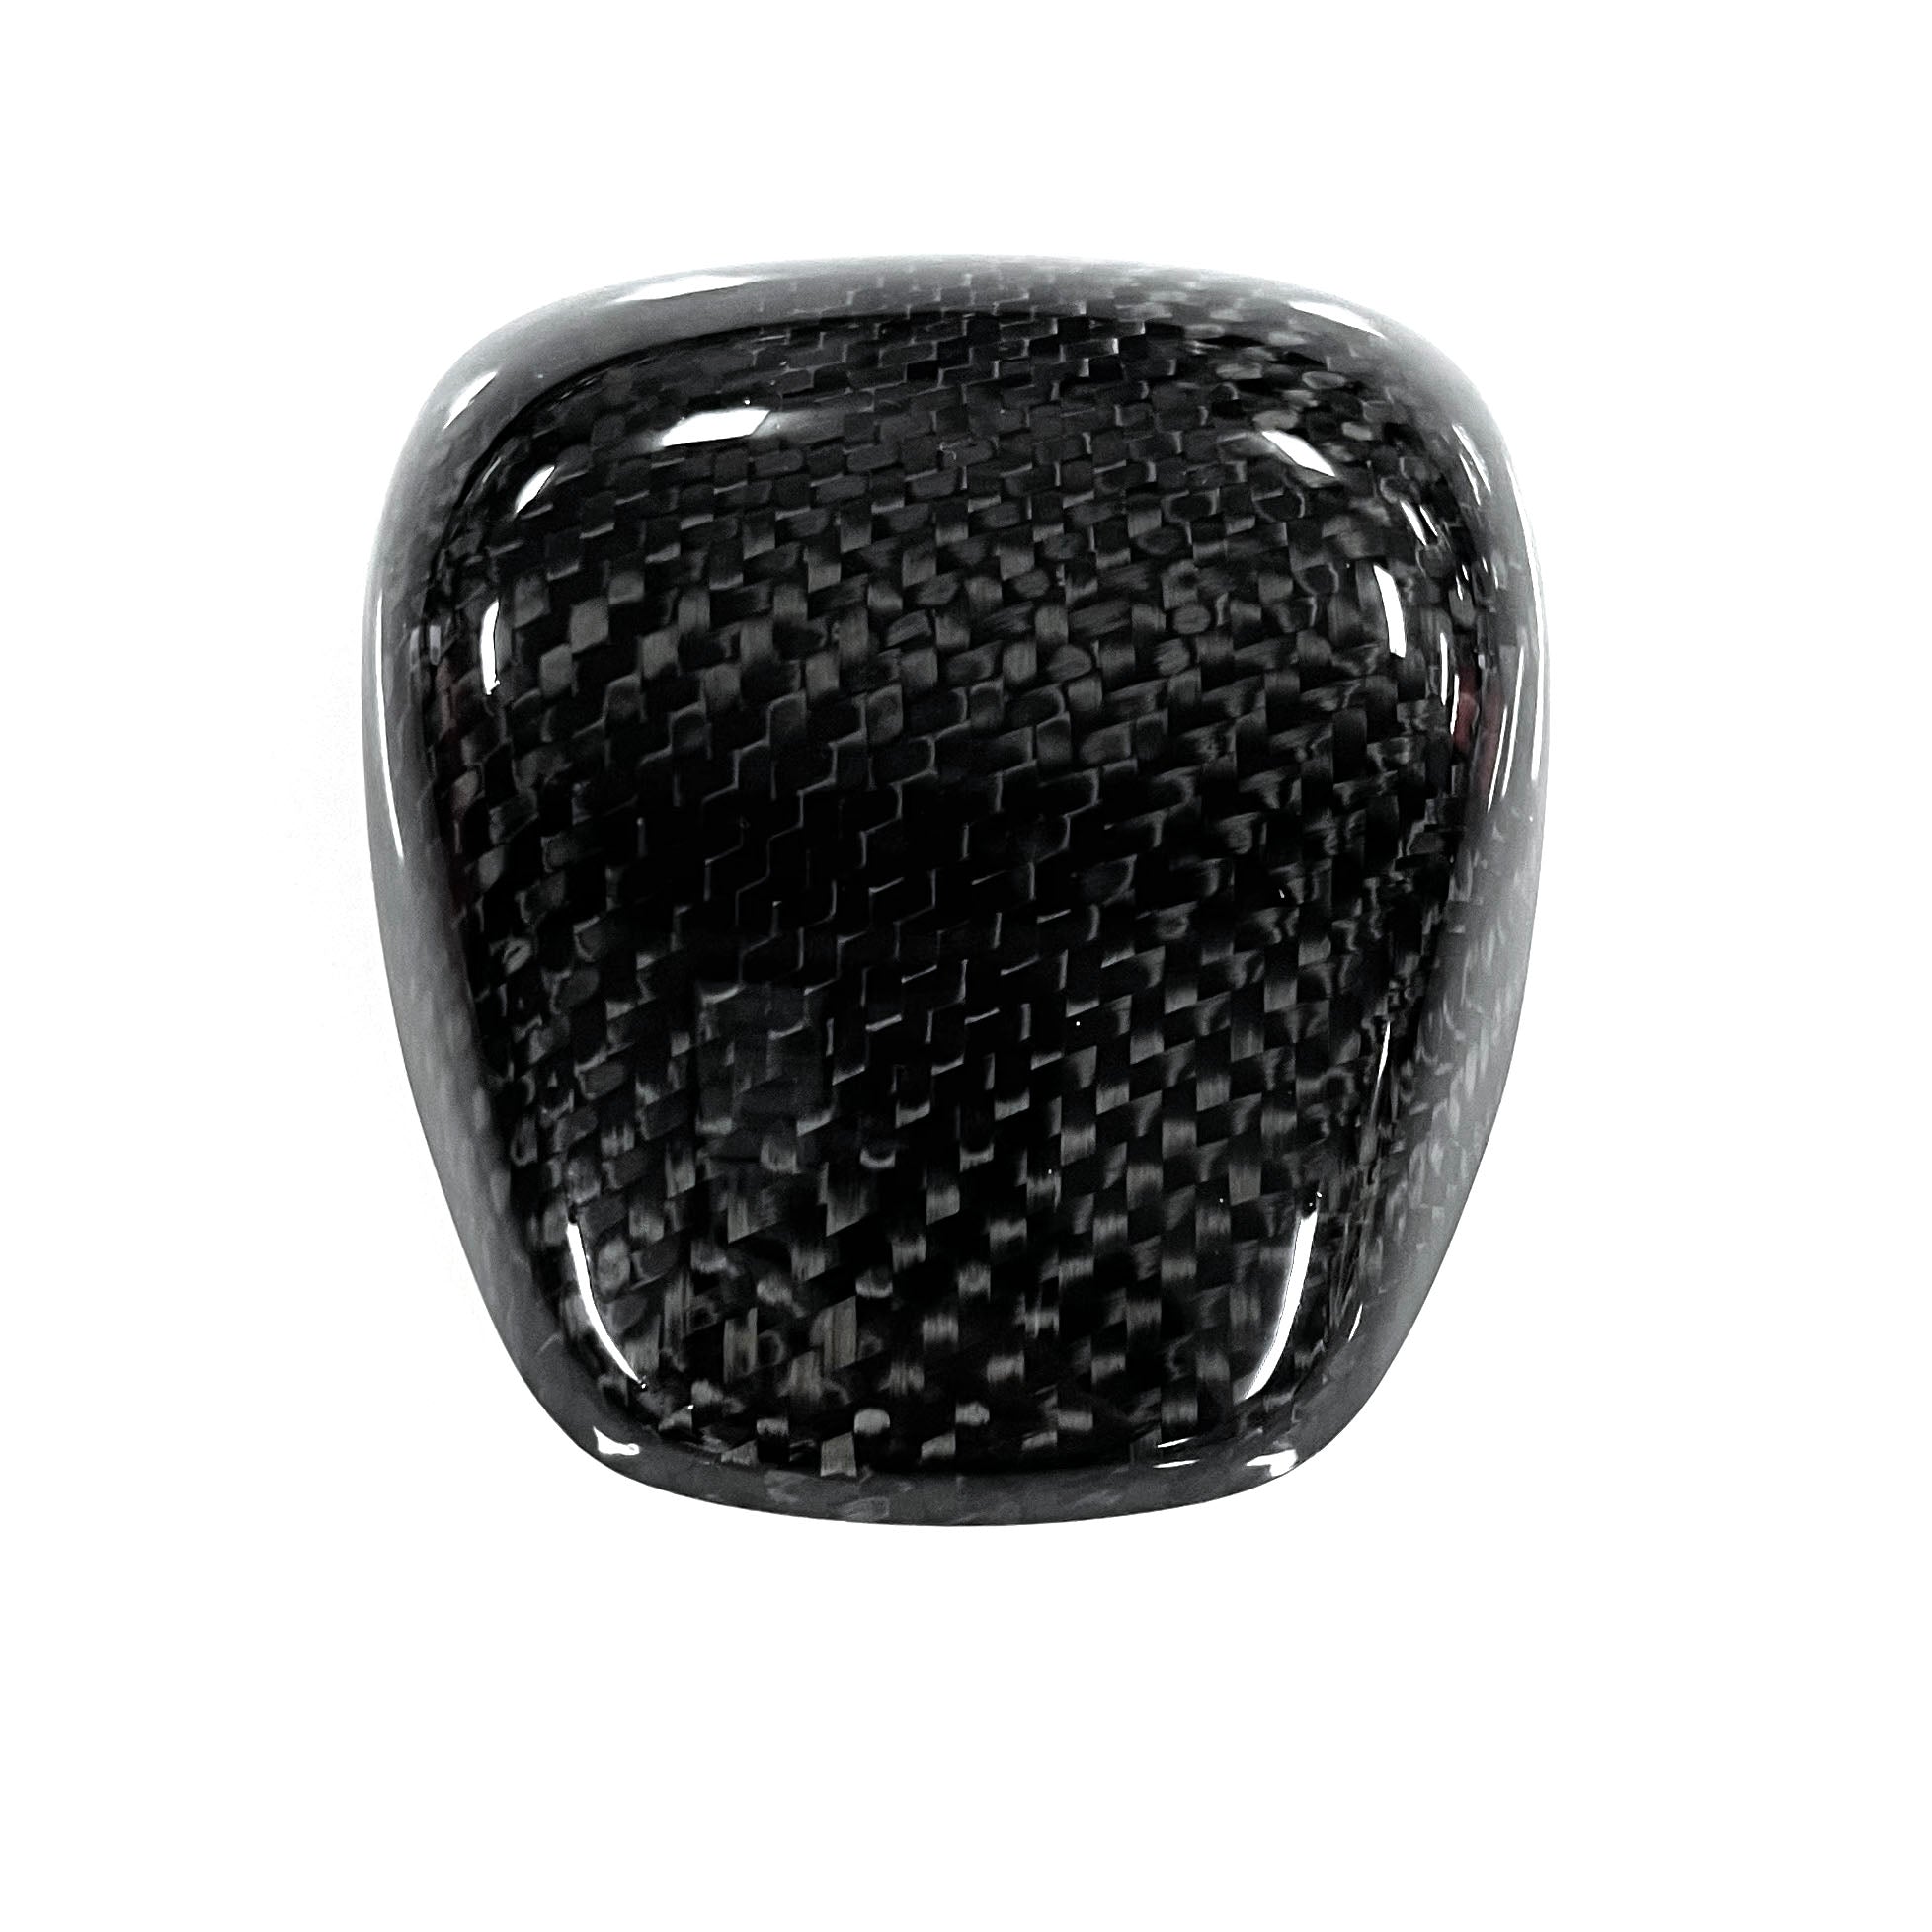 M&S Carbon Fiber Shift Knob Replacement Cover for KIA Stinger (Forged CF Available)